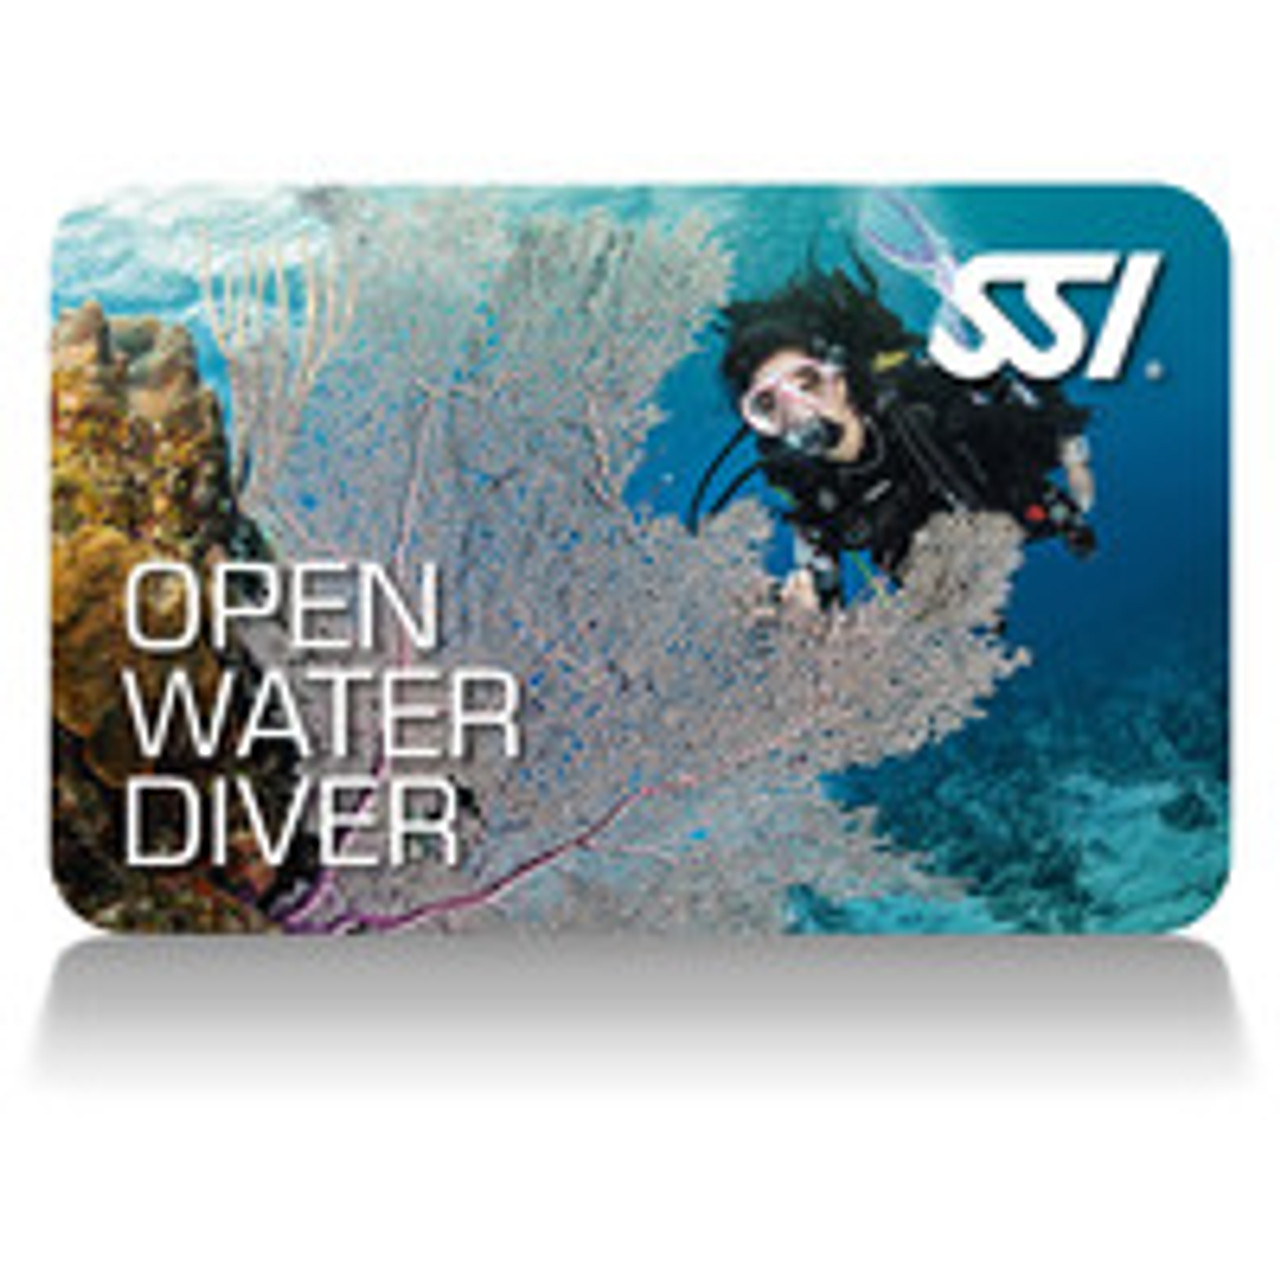 SSI Open Water Diver Course